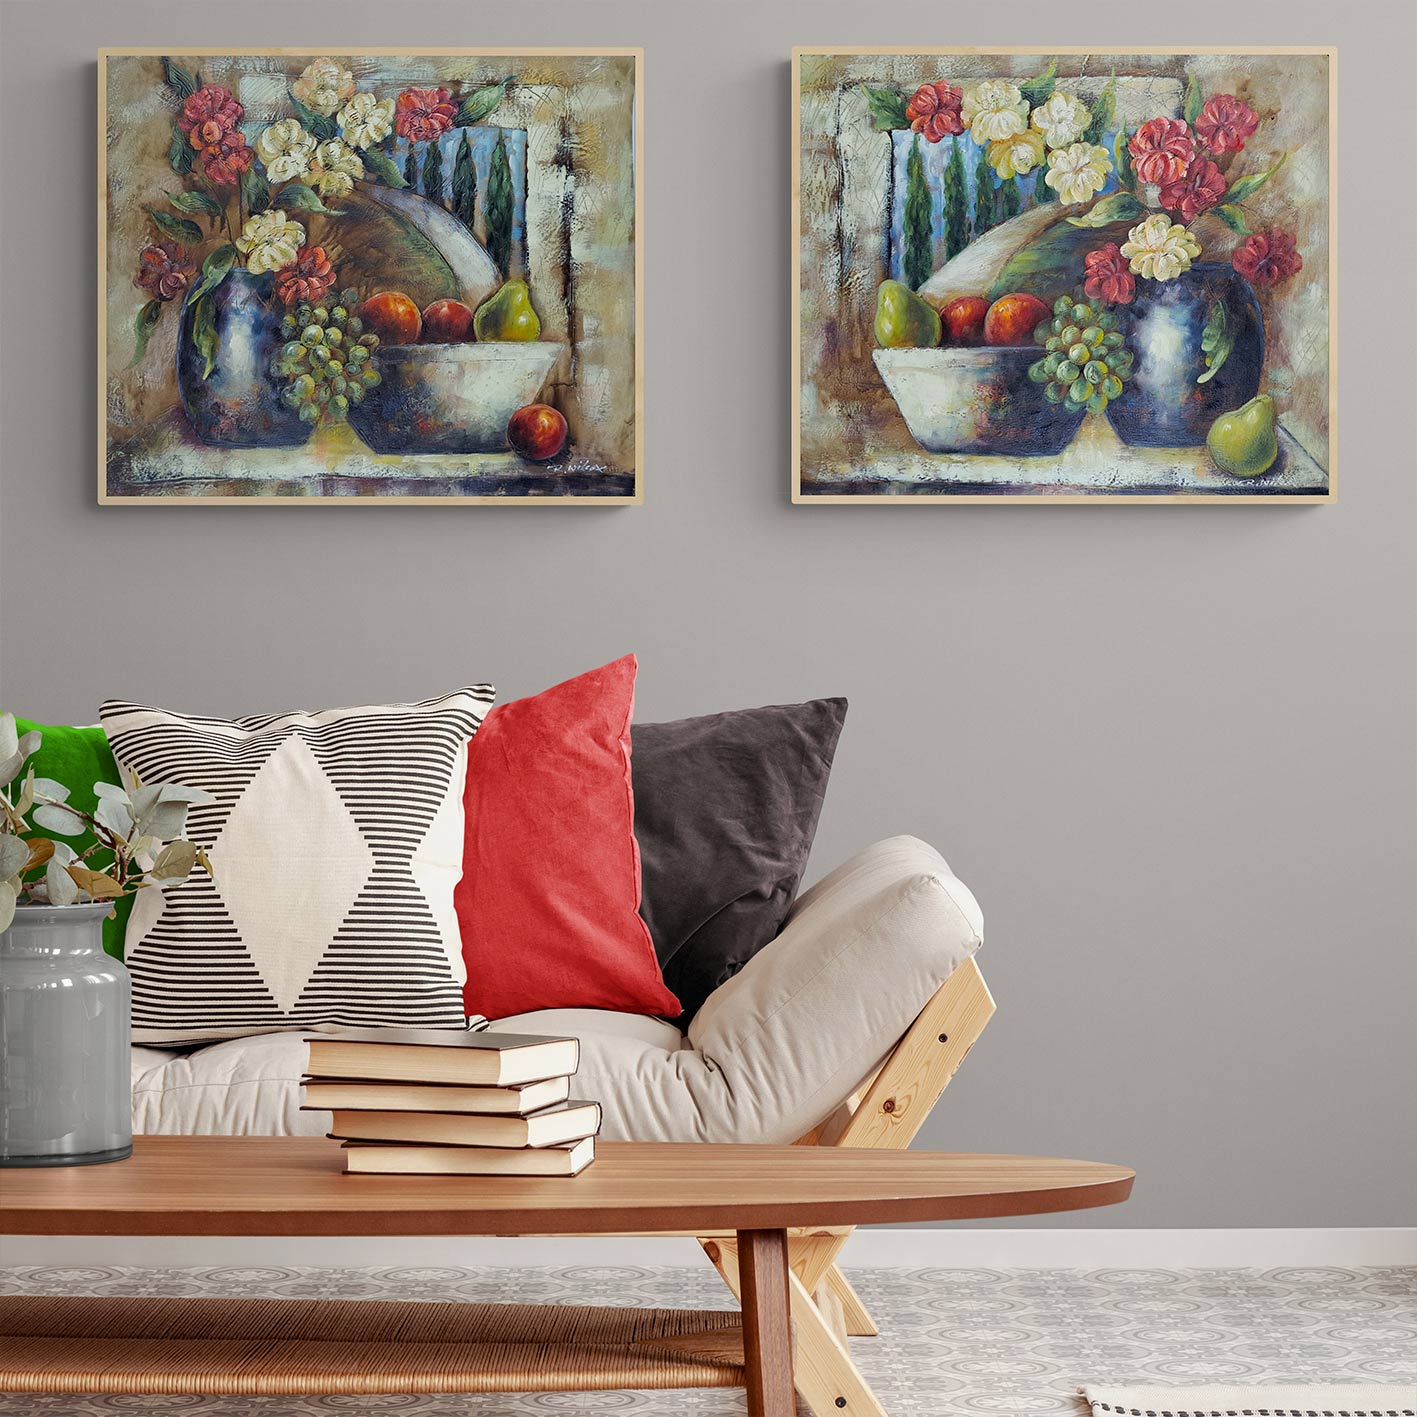 Floral Still Life Diptych Painting 60x50 cm [2 pieces]